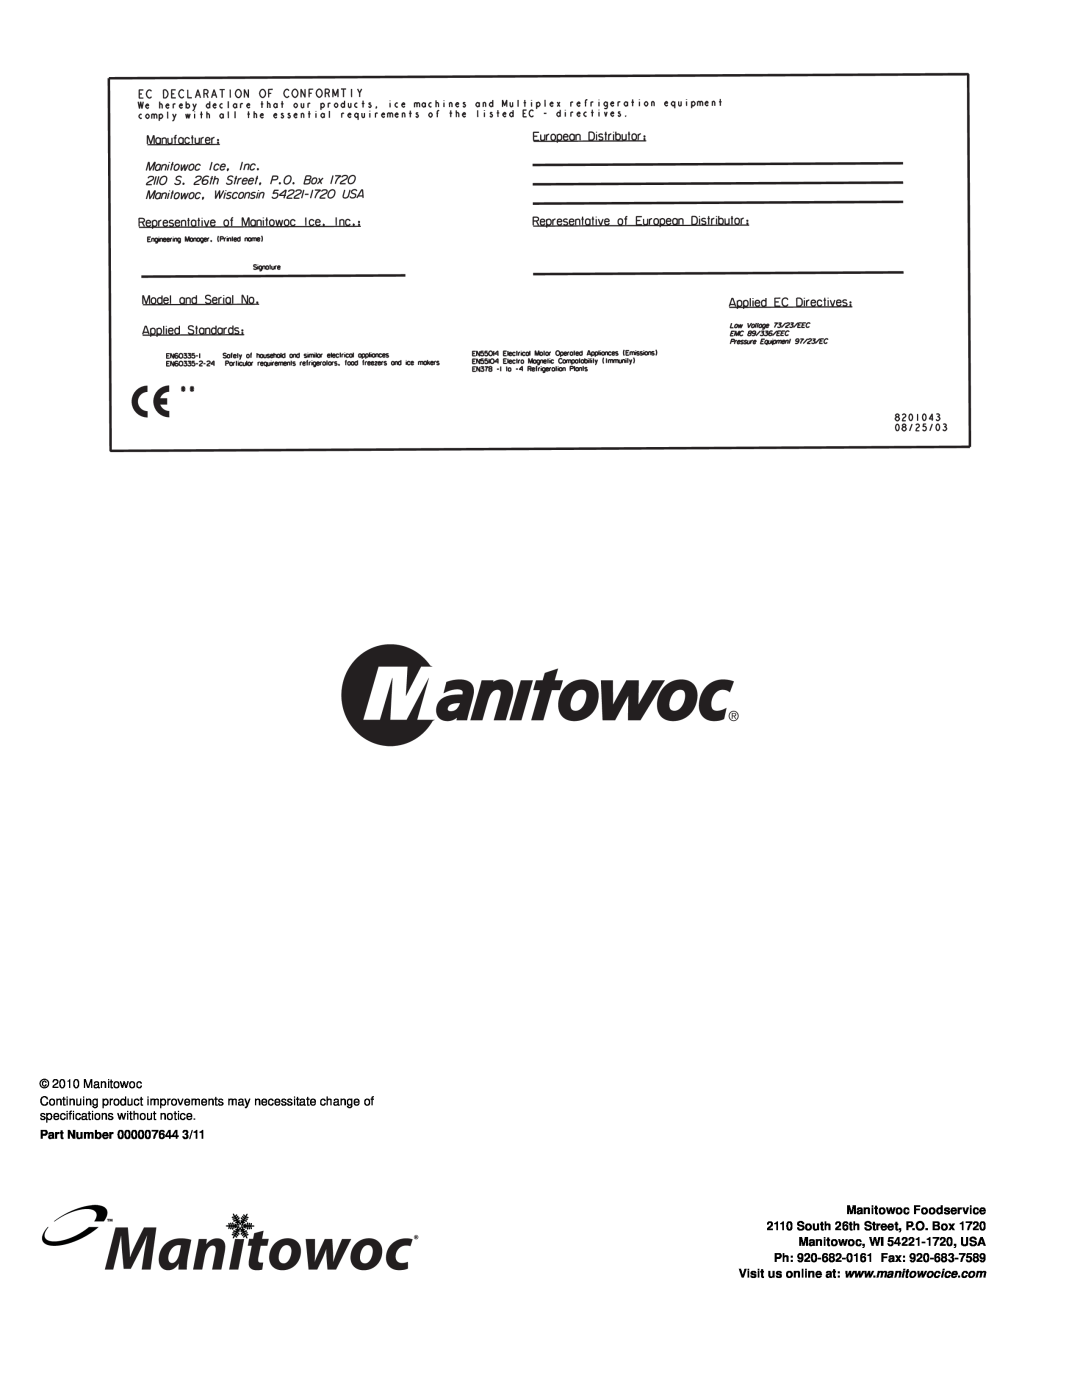 Manitowoc Ice RF manual Part Number 000007644 3/11, Manitowoc Foodservice, South 26th Street, P.O. Box 